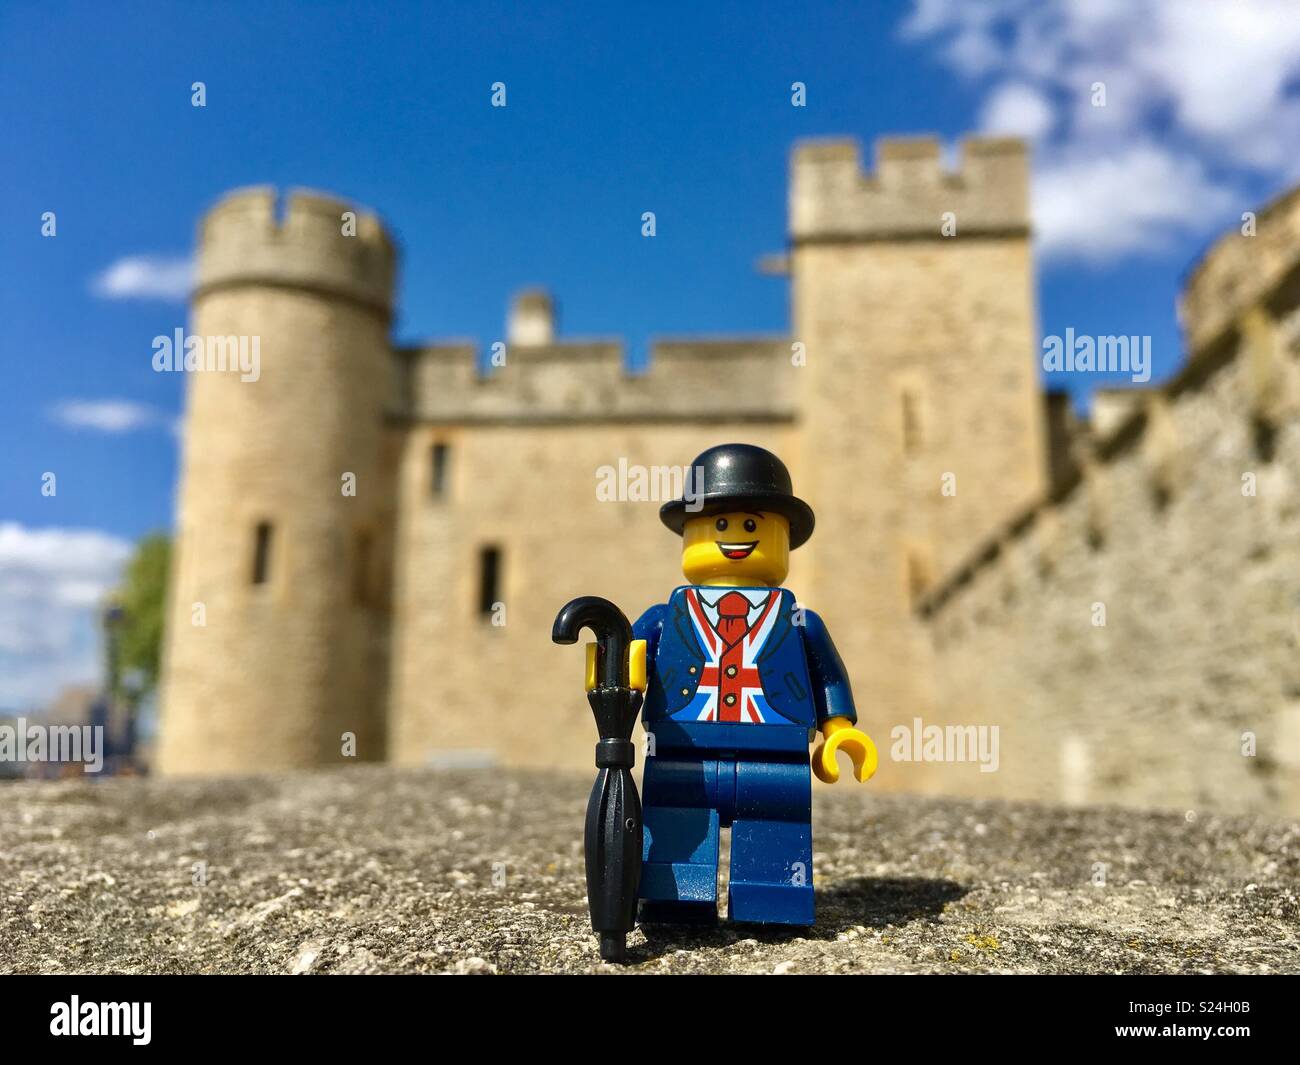 British LEGO minifigure at the Tower of London Stock Photo